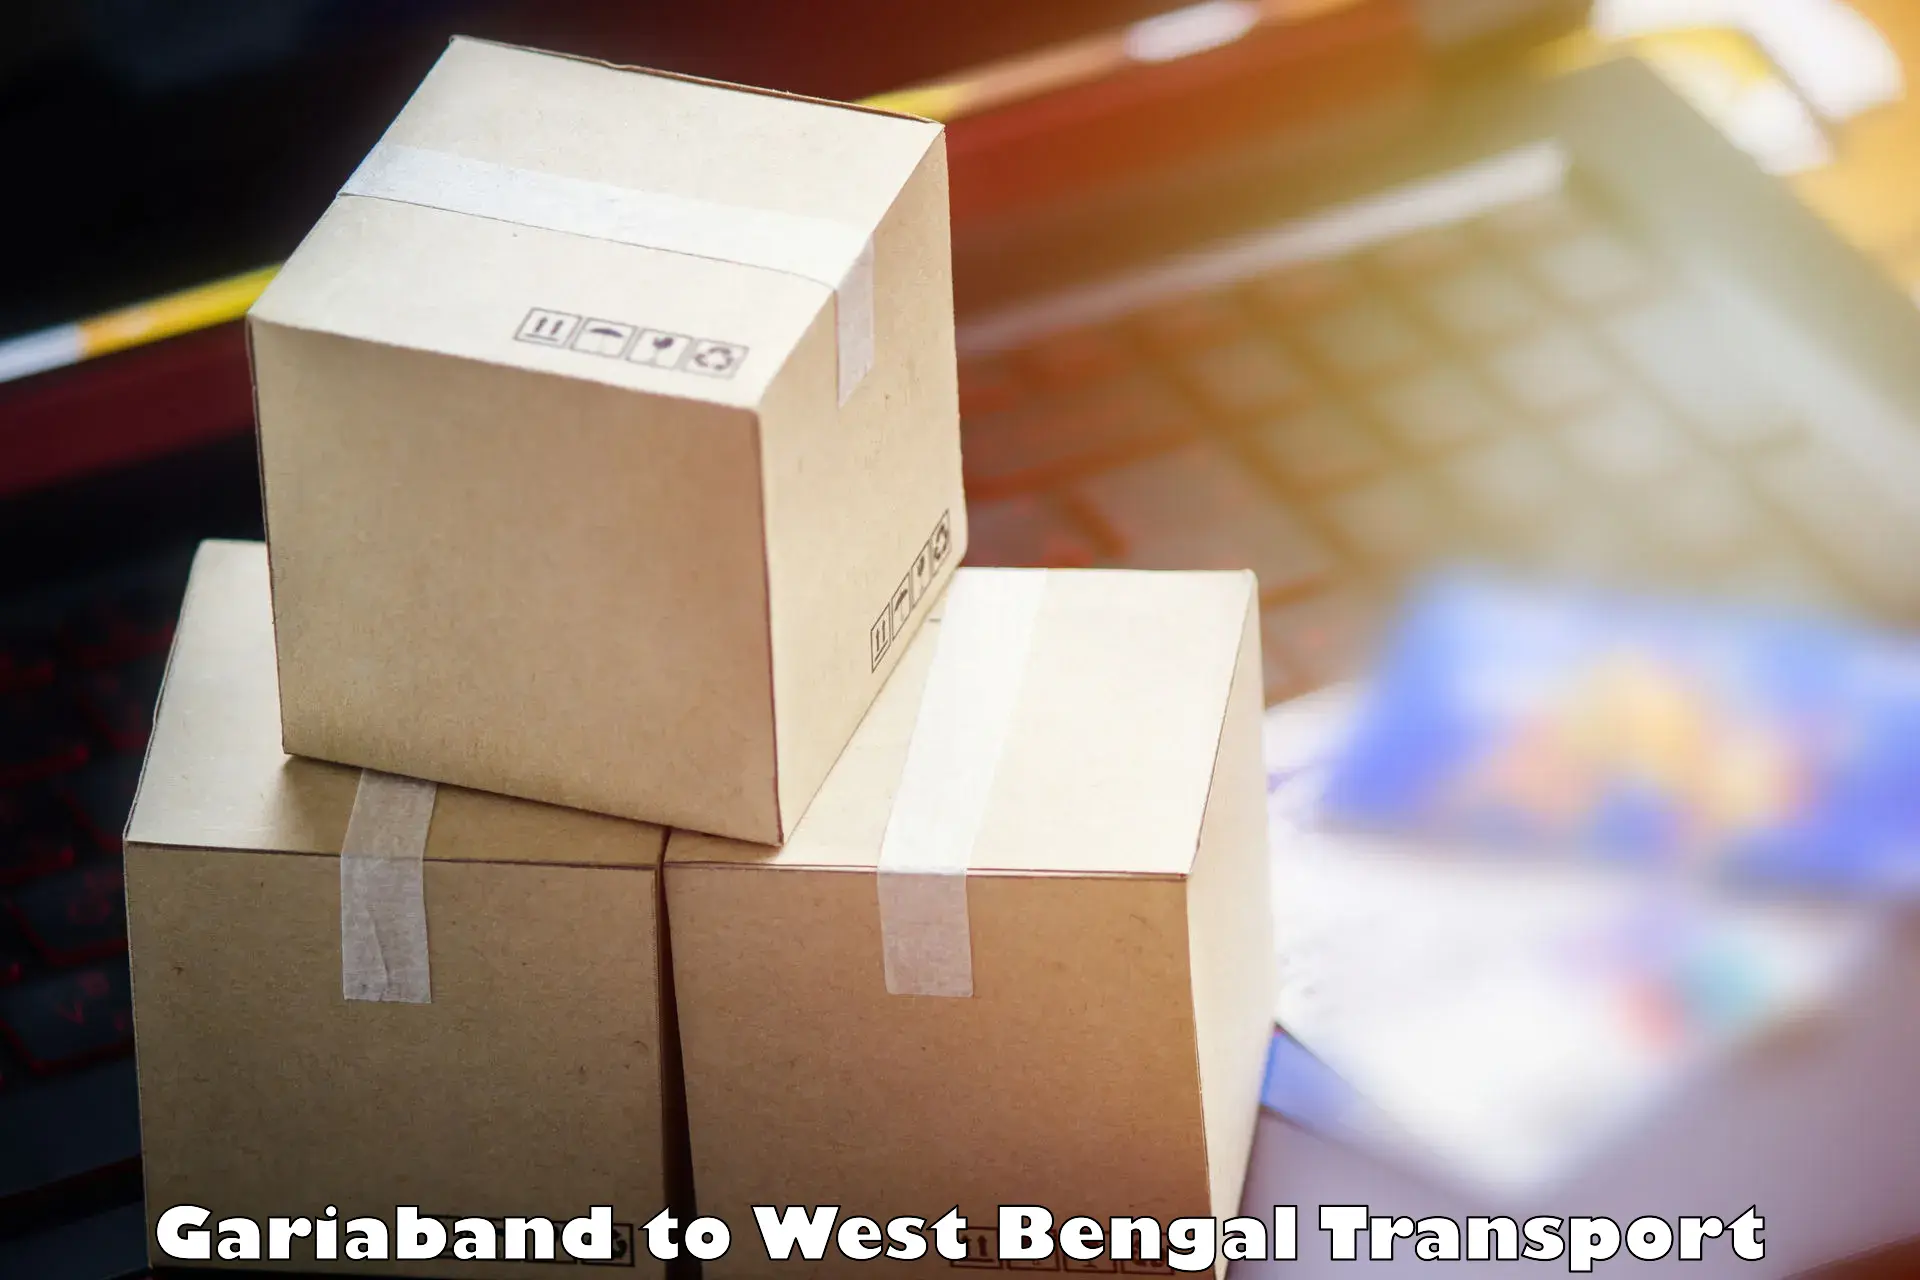 Nationwide transport services Gariaband to West Bengal